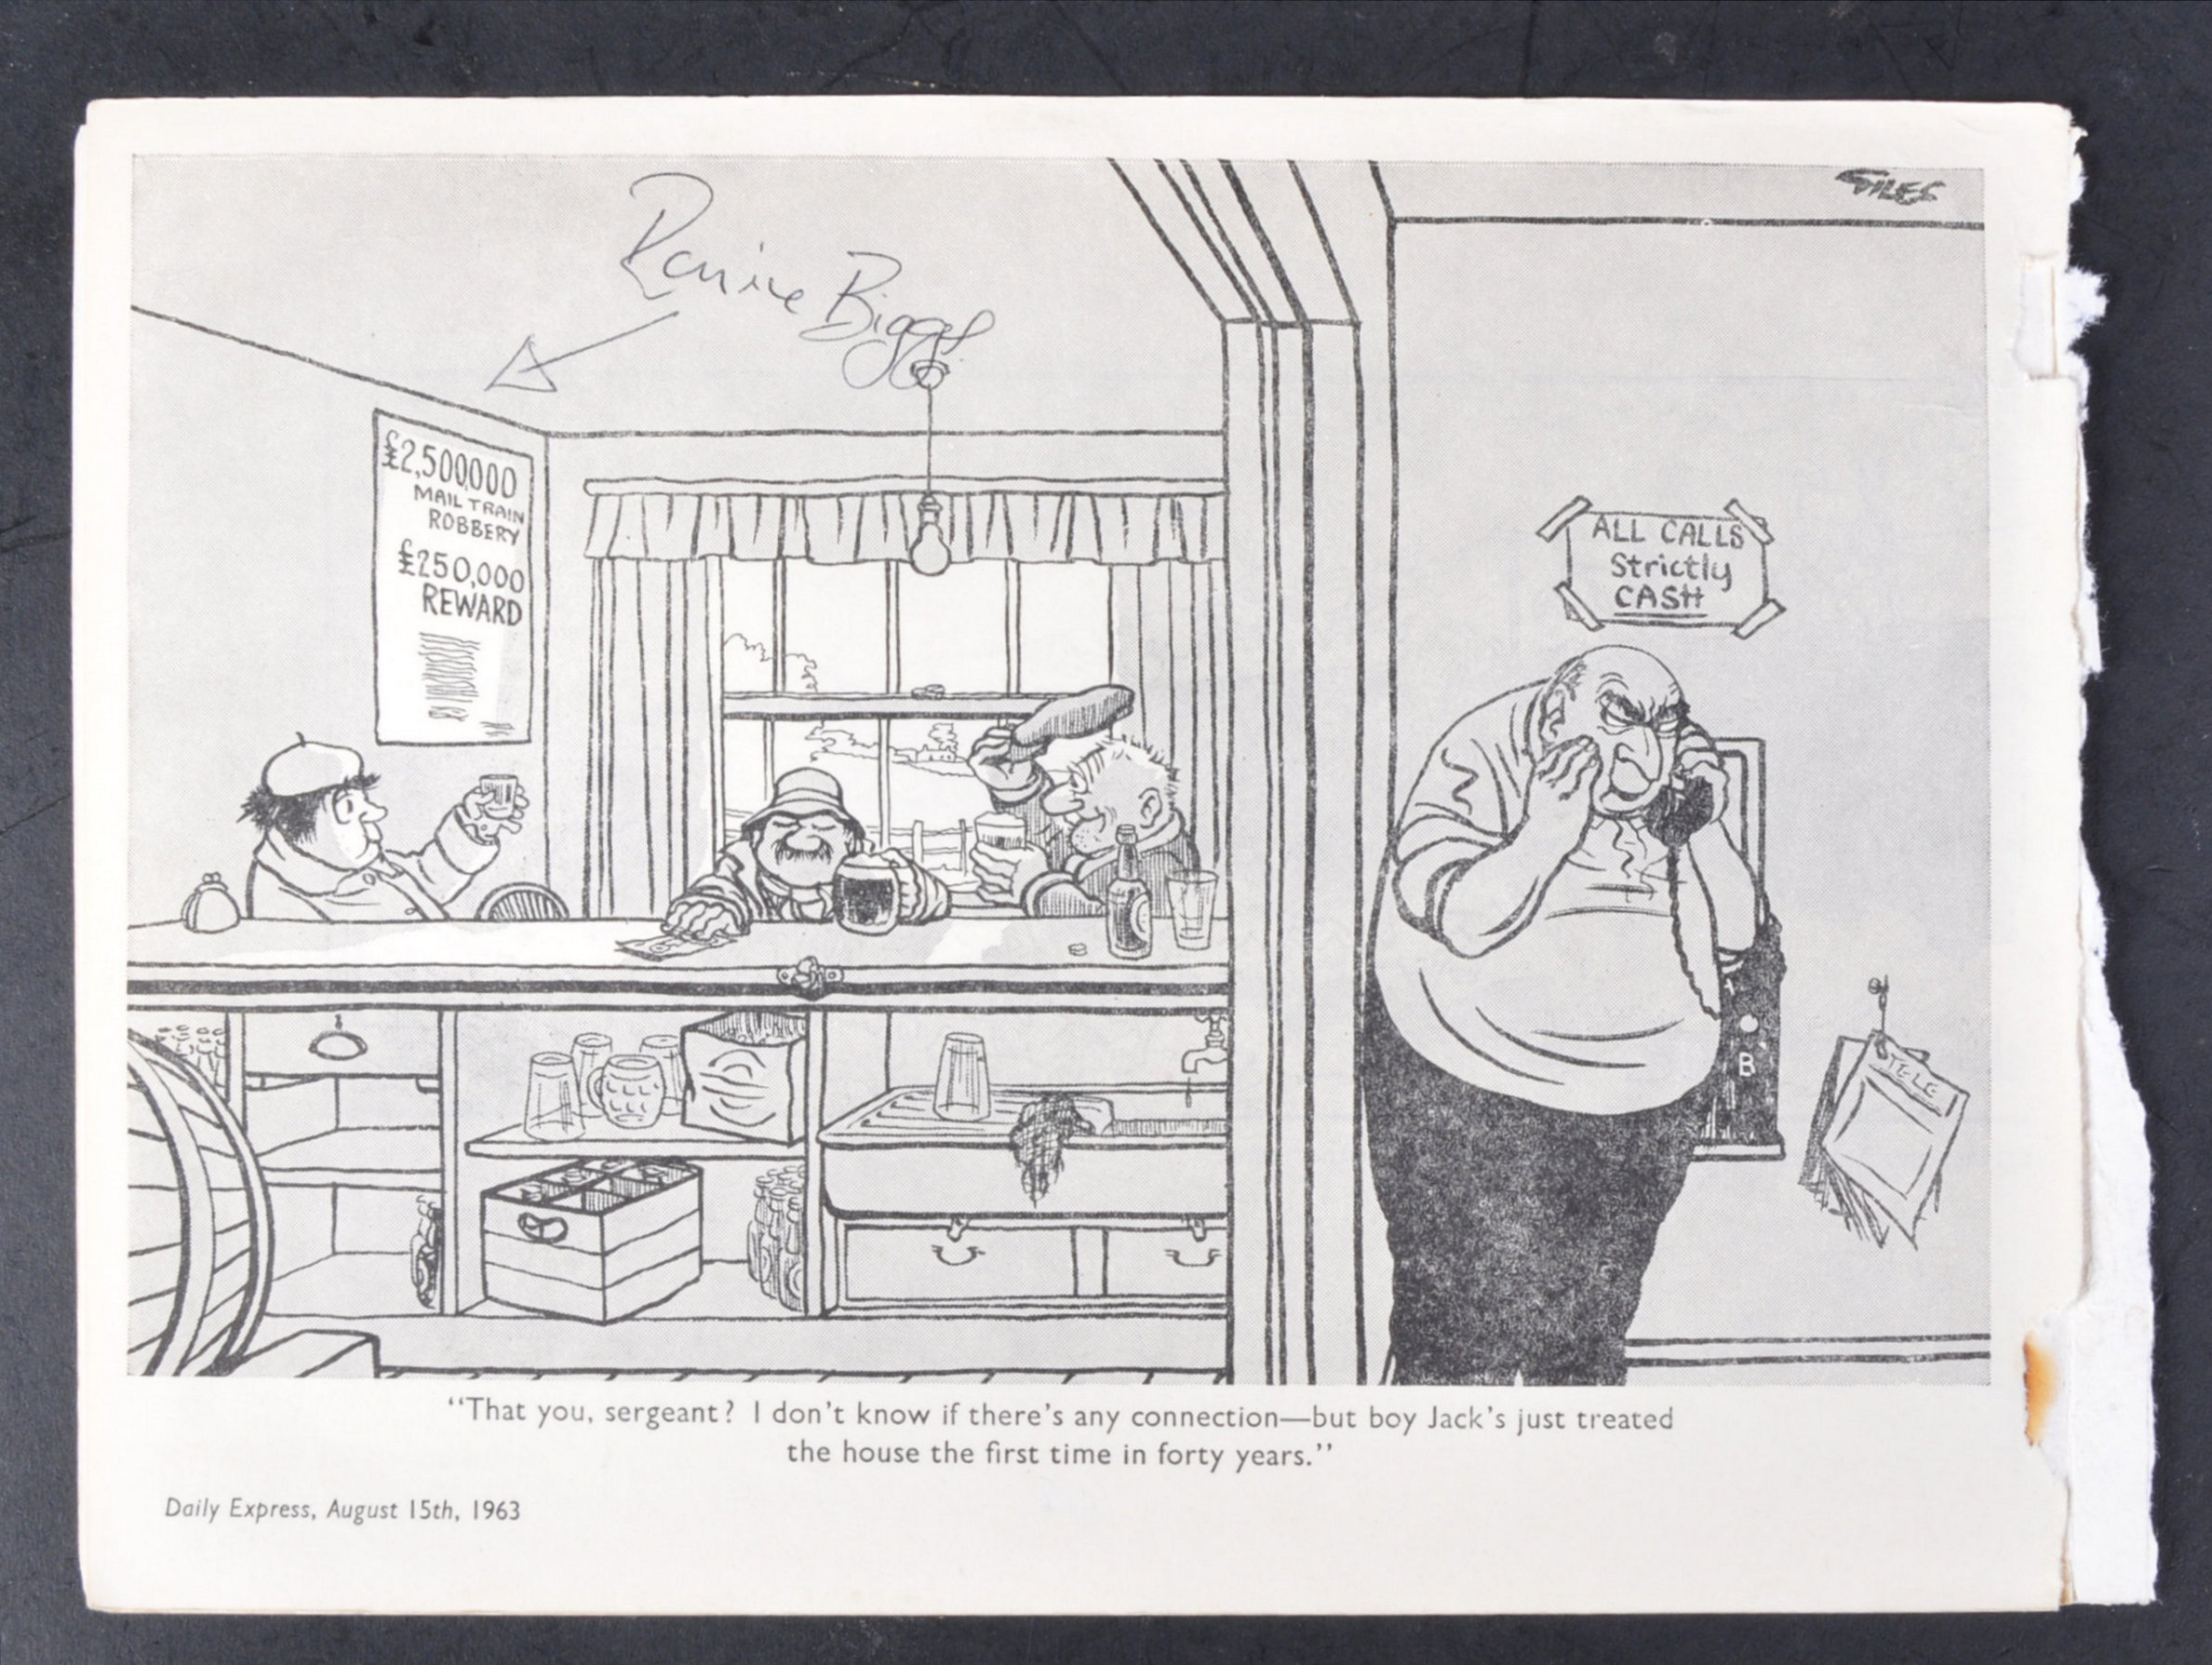 GREAT TRAIN ROBBERY - RONNIE BIGGS (1929-2013) - SIGNED CARTOON